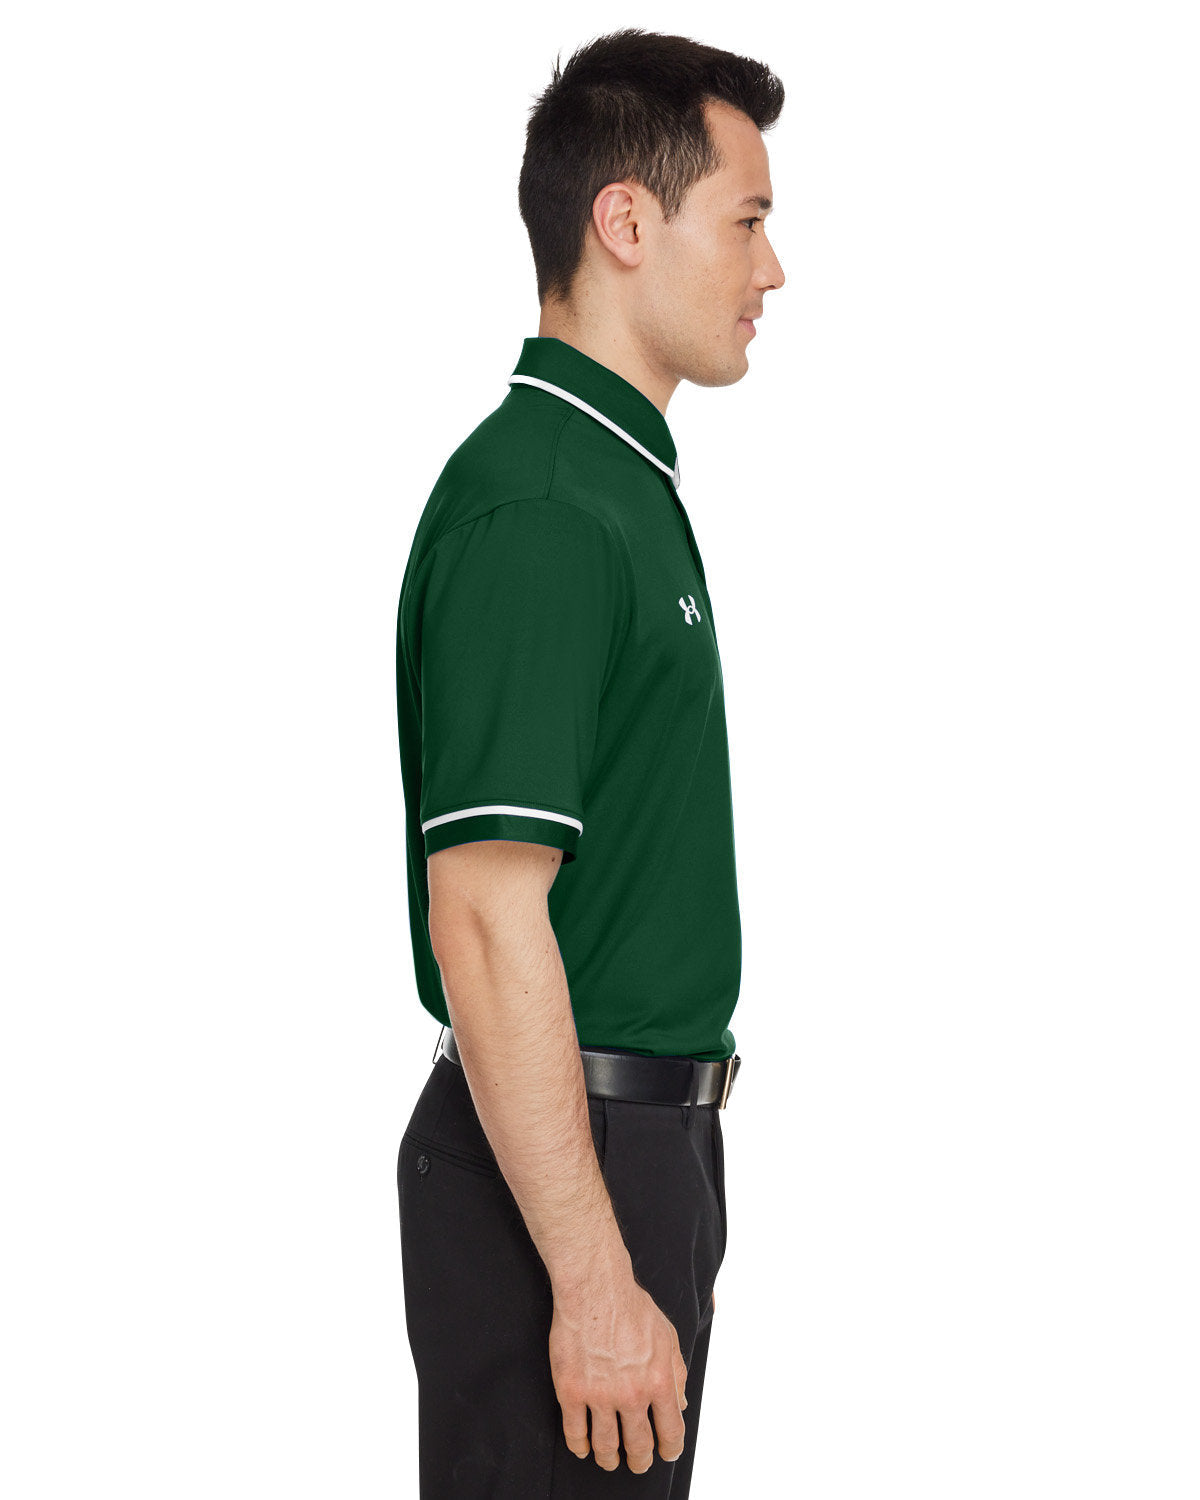 Under Armour Men's Tipped Teams Performance Branded Polos, Forest Green